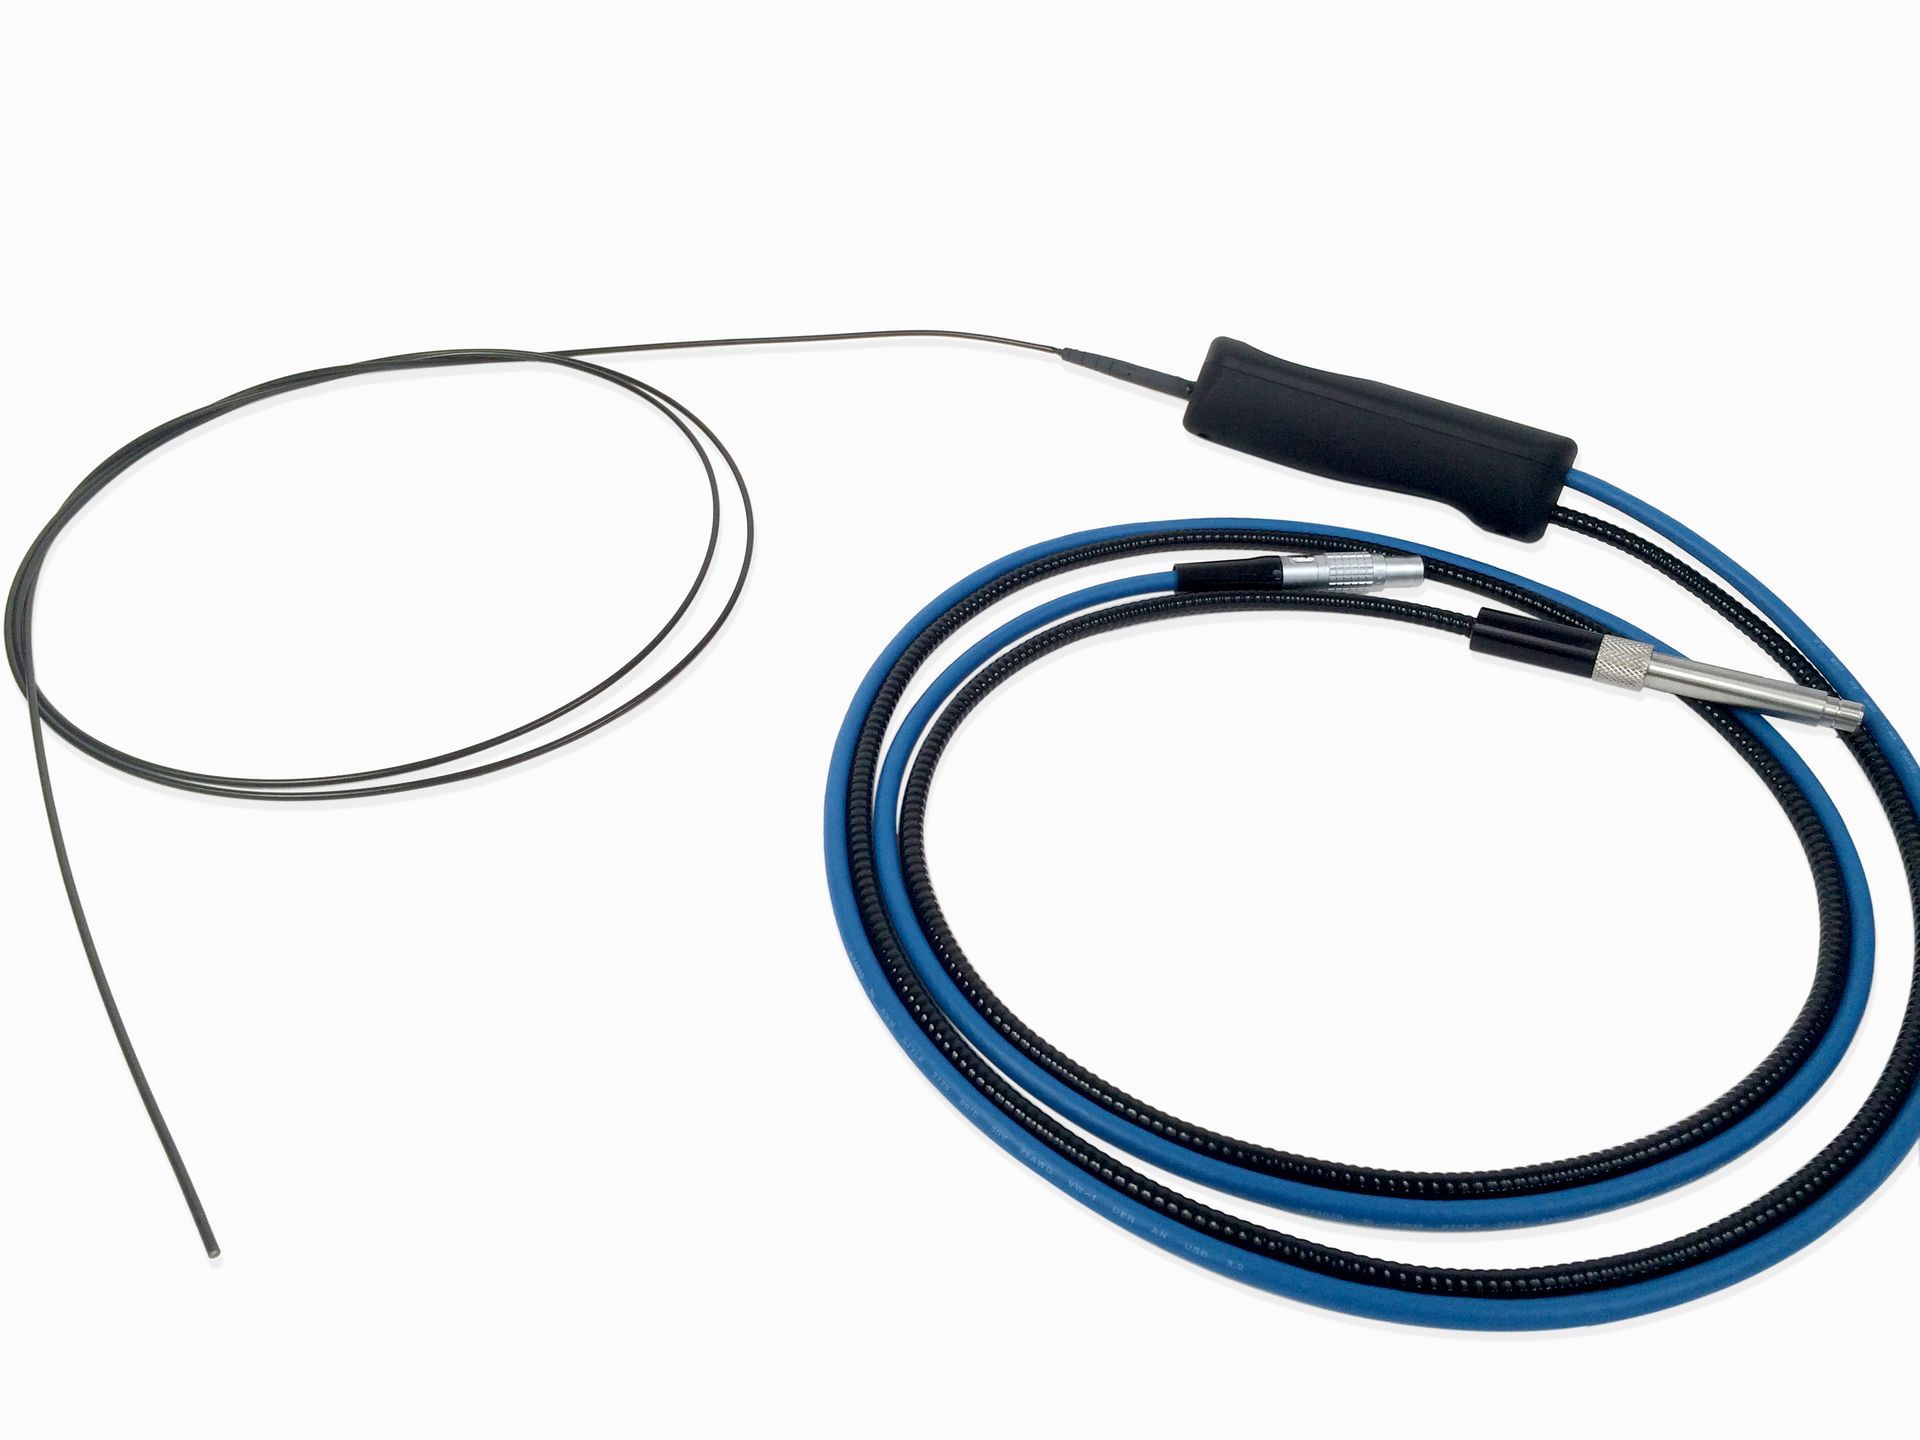 A black and blue cable with a black handle on a white background